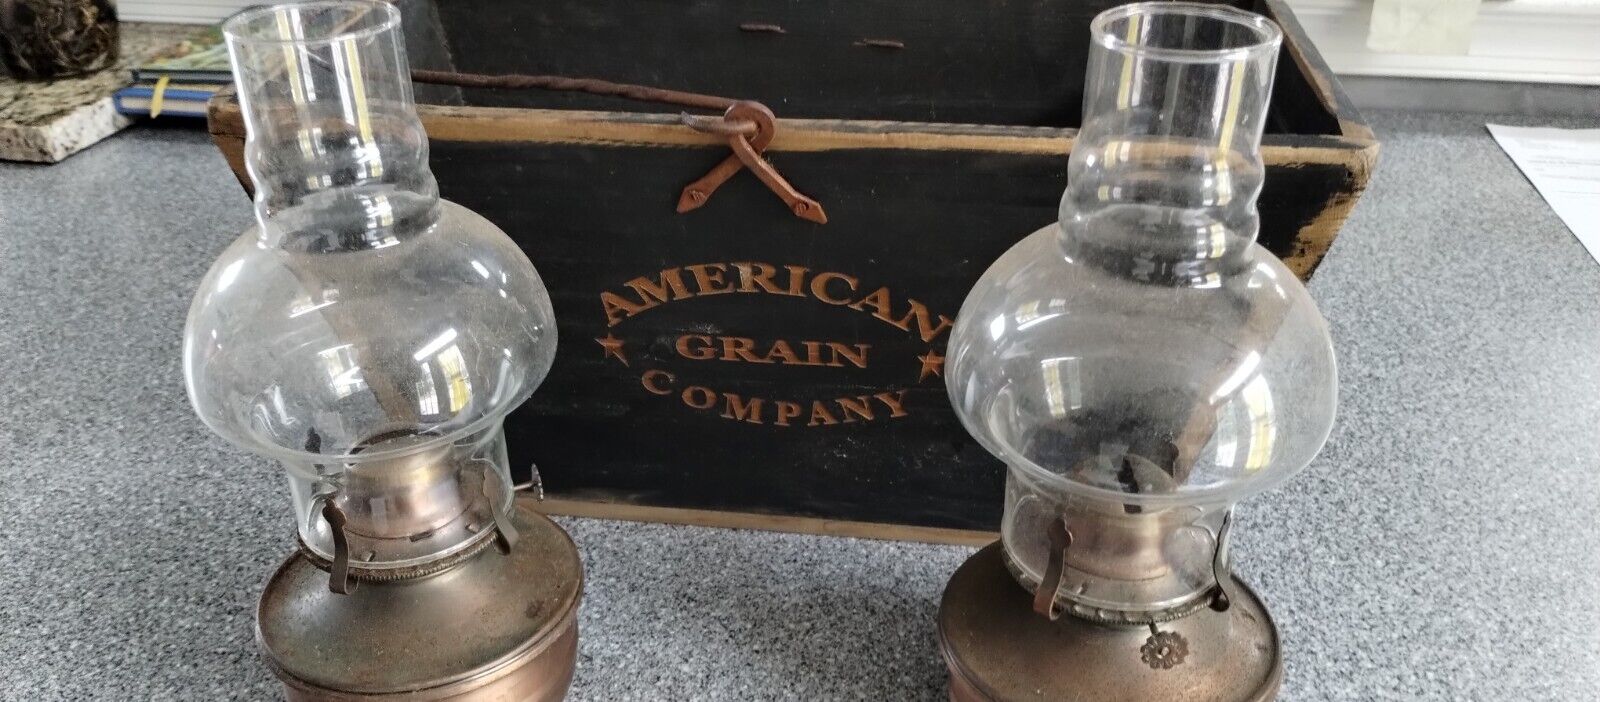 Vntg American Grain Co. Woode/with Lamps _Bucket Wrought Iron Antique Primitive